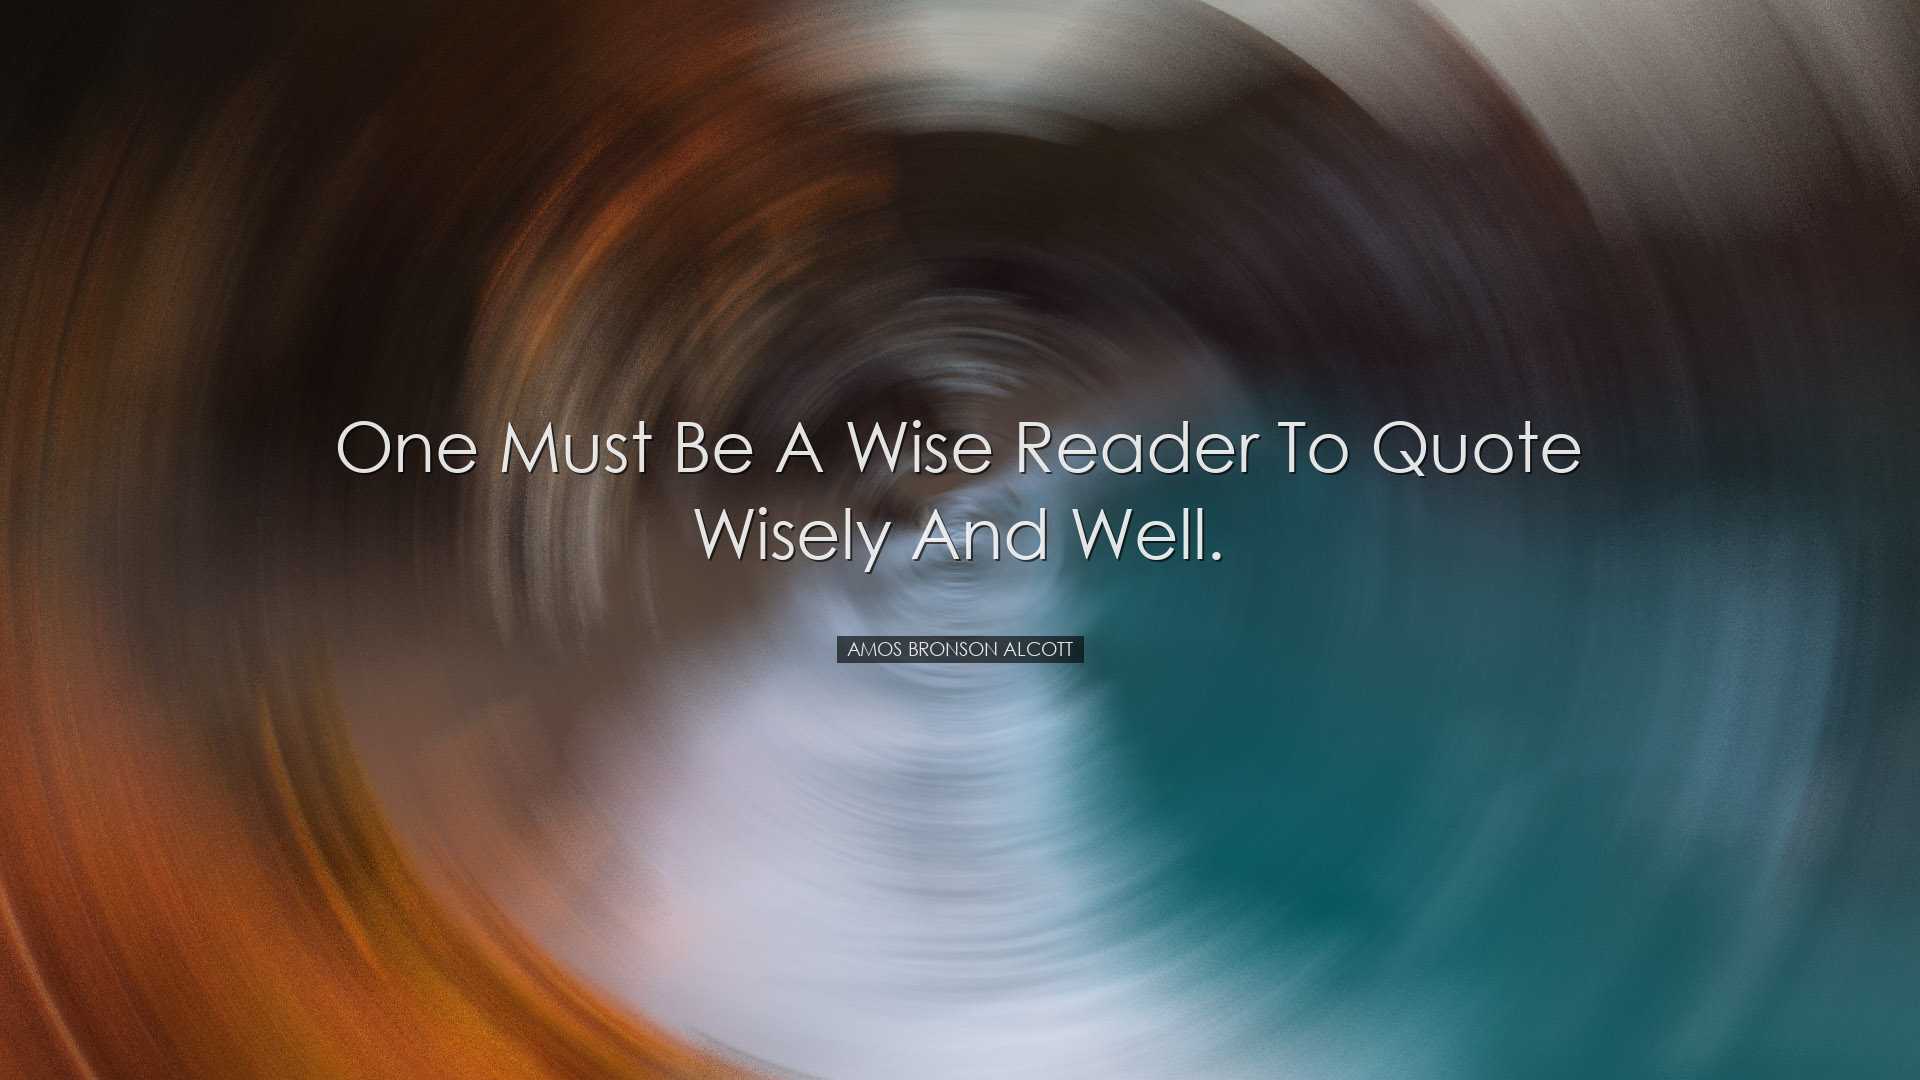 One must be a wise reader to quote wisely and well. - Amos Bronson